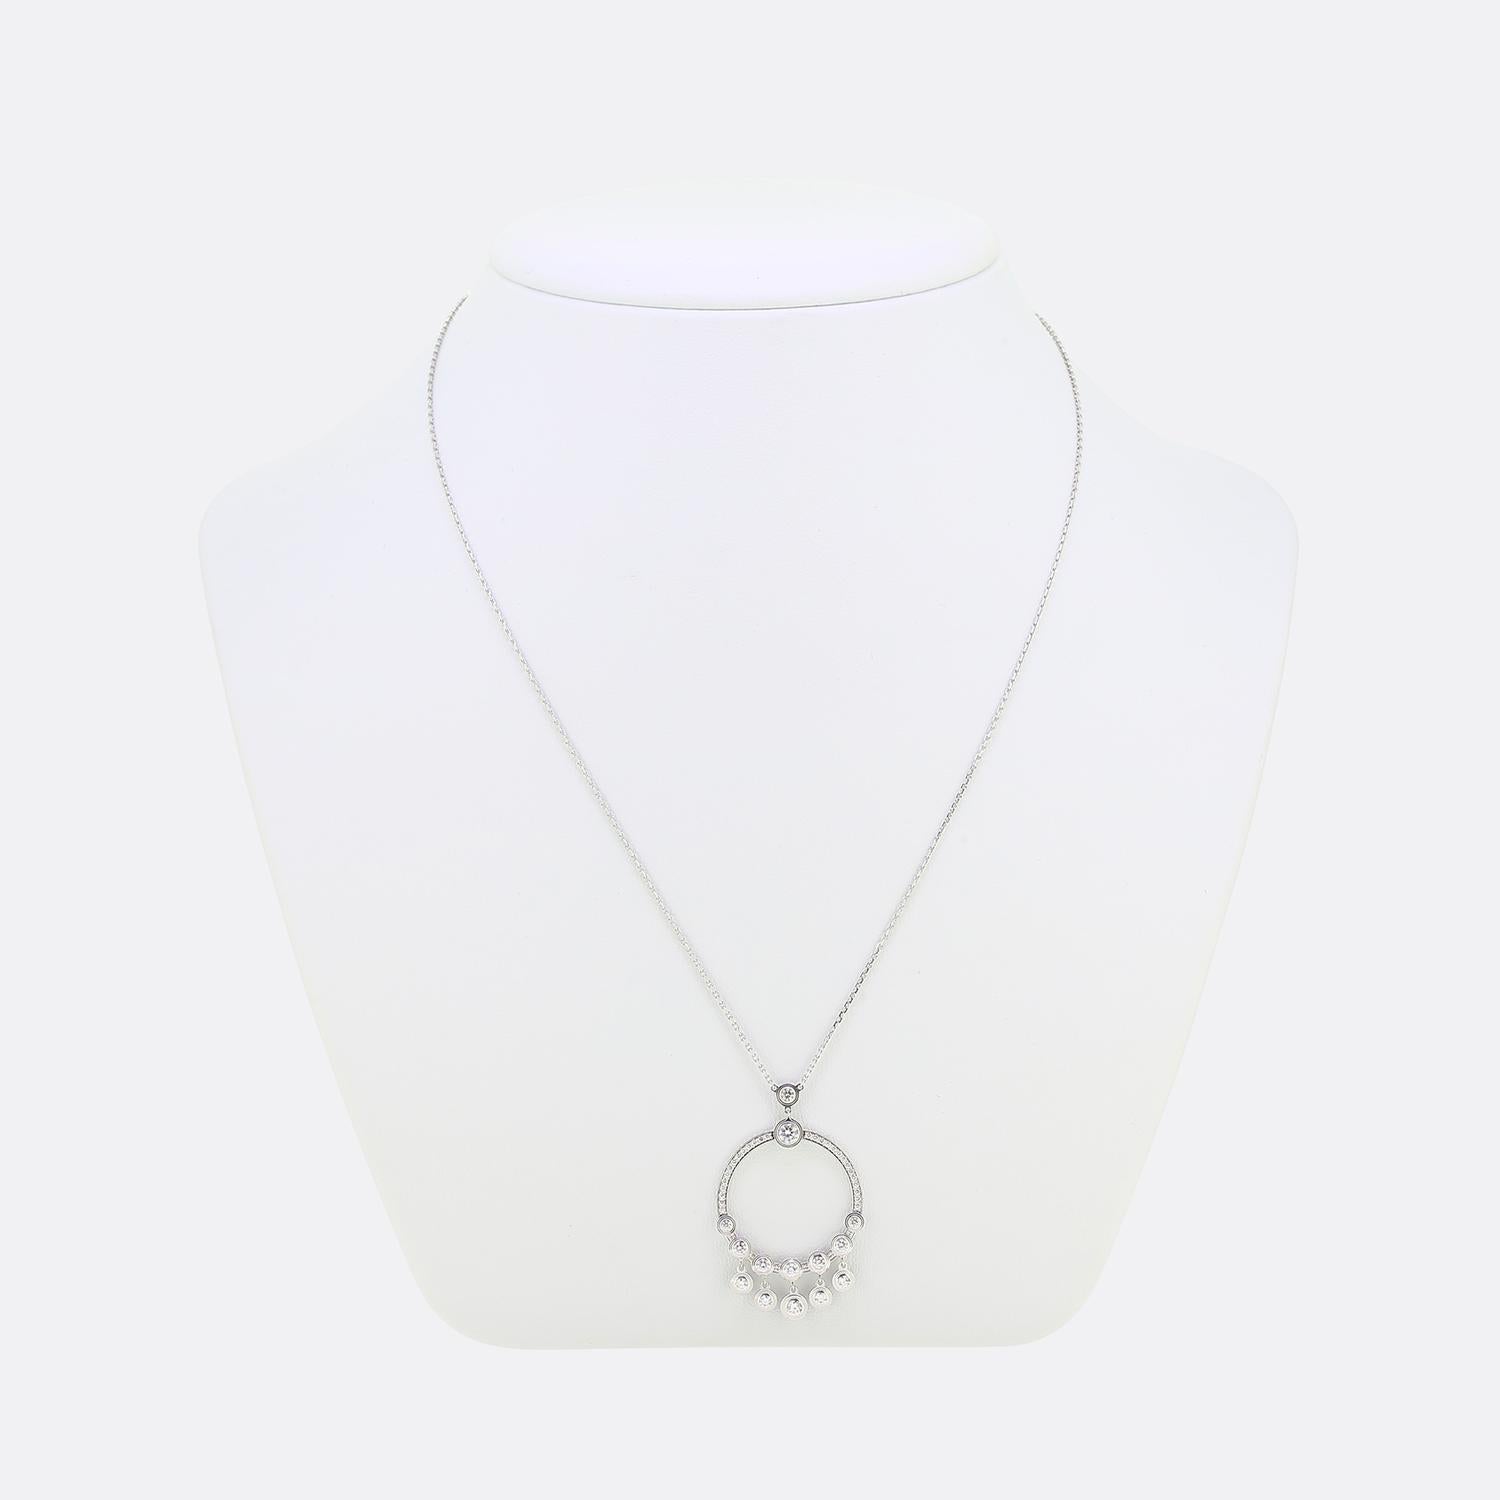 Here we have a delightful necklace from the world renowned jewellery house of Cartier. This pendant forms part of their iconic d'Amour collection and features 5 freely dangling bezel-set diamonds from a main diamond set open circular frame. A duo of